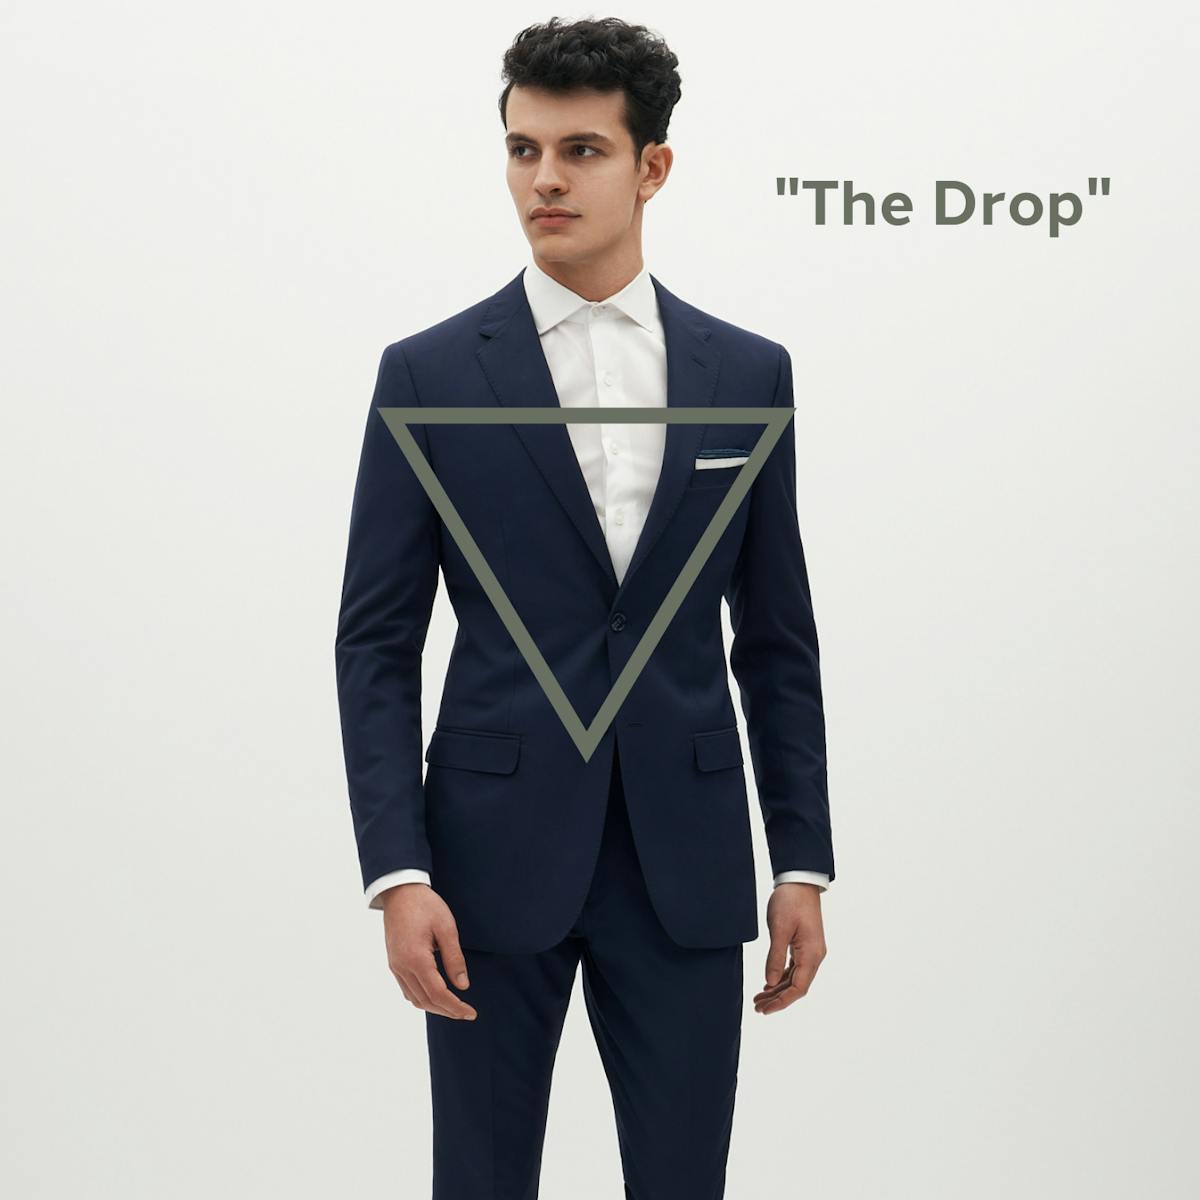 Goed opgeleid Slepen decaan Three Things You Need To Know To Find A Well Fitted Suit | SuitShop